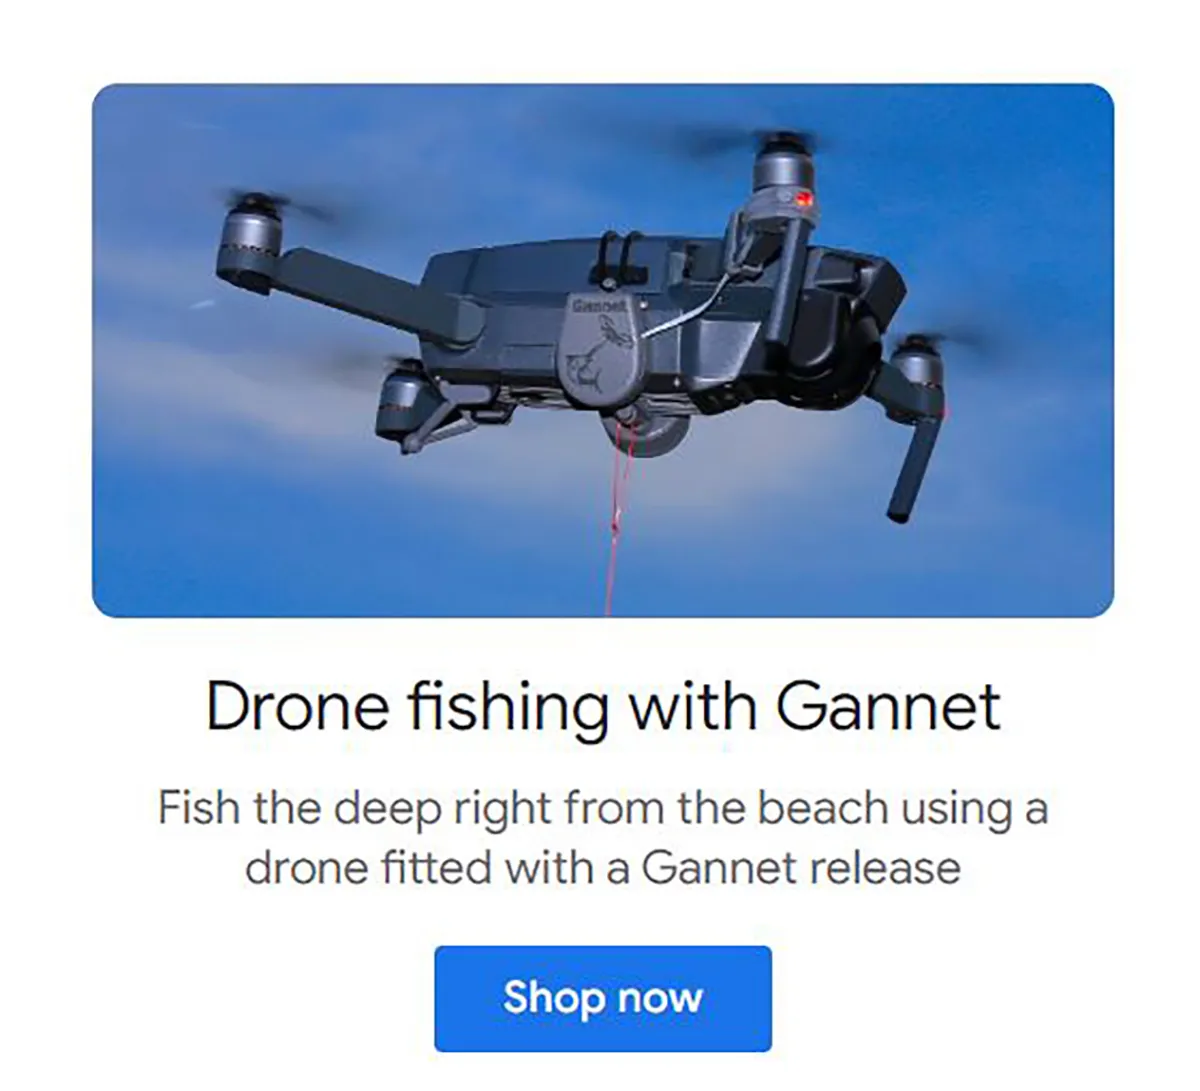 Drone fishing spins a tangled nest of legal, ethical and